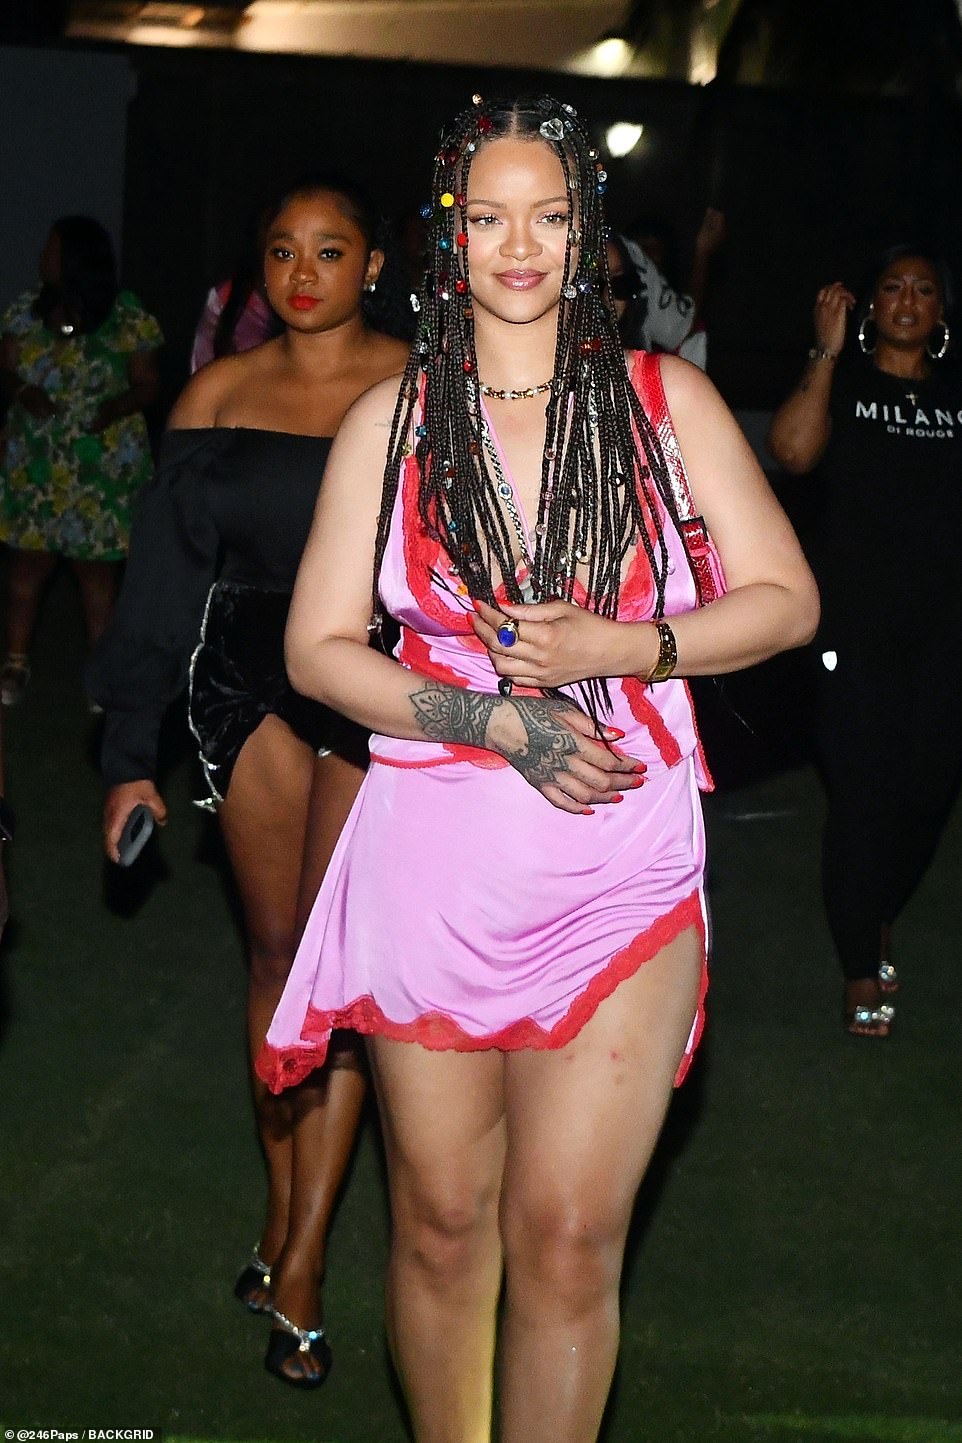 Stylish: While rocking a pink minidress and red high heels, the Diamonds hitmaker was seen wrapping her legs around her beau, who seemed to carry her with ease as they listened to Popcaarn, Bounty Killer and Michel Montano perform on stage